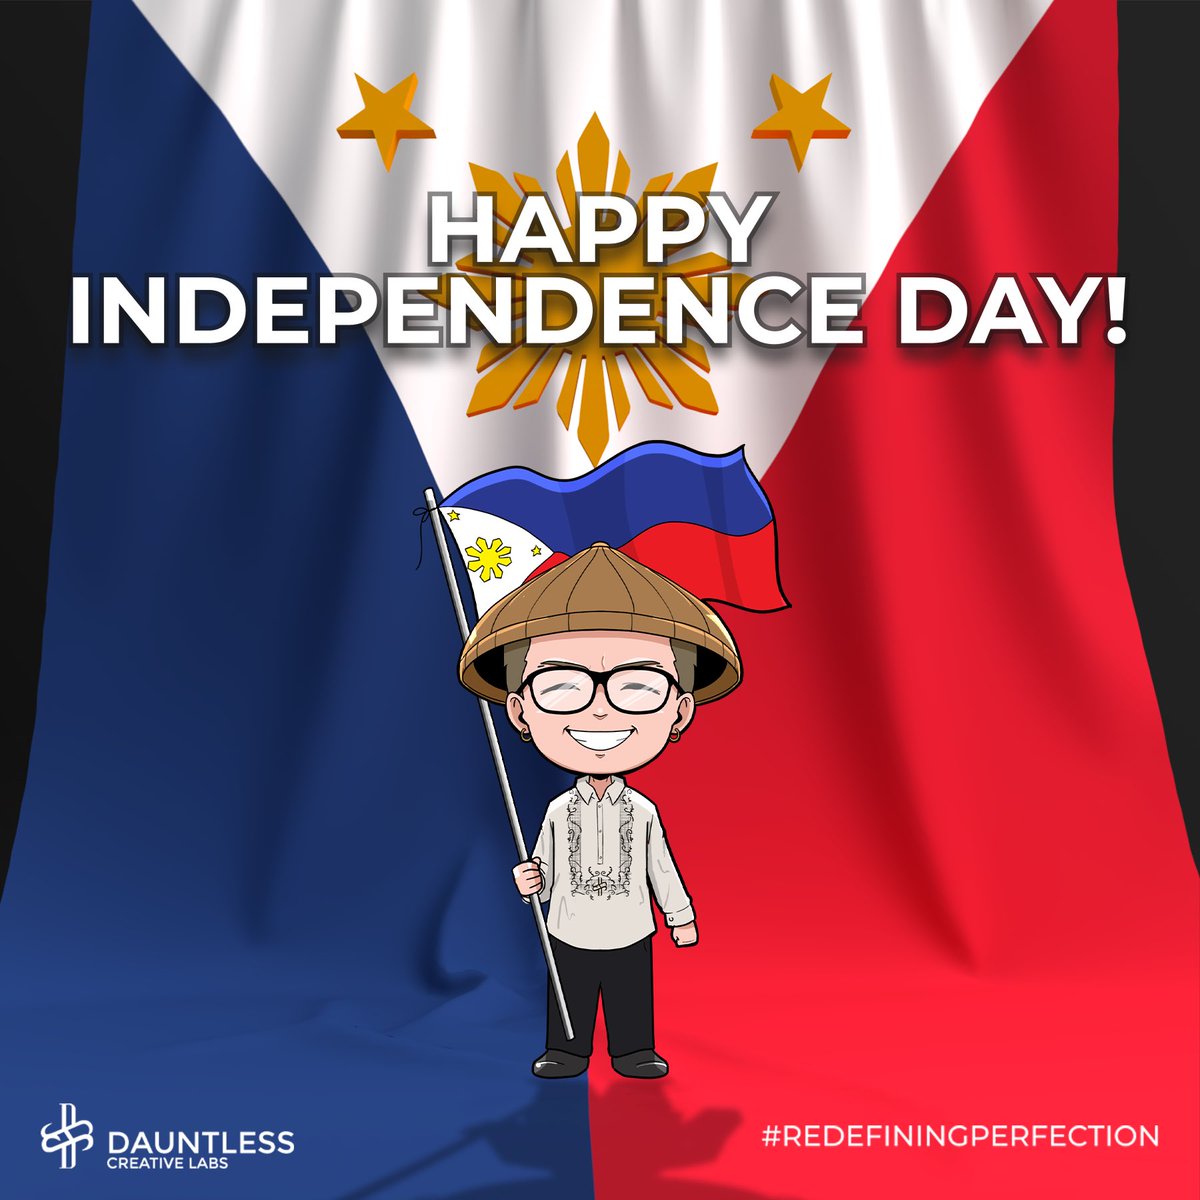 Happy Independence Day! Let's celebrate the freedom, unity, and spirit of our great nation. 

#BeDauntless #RedefiningPerfection